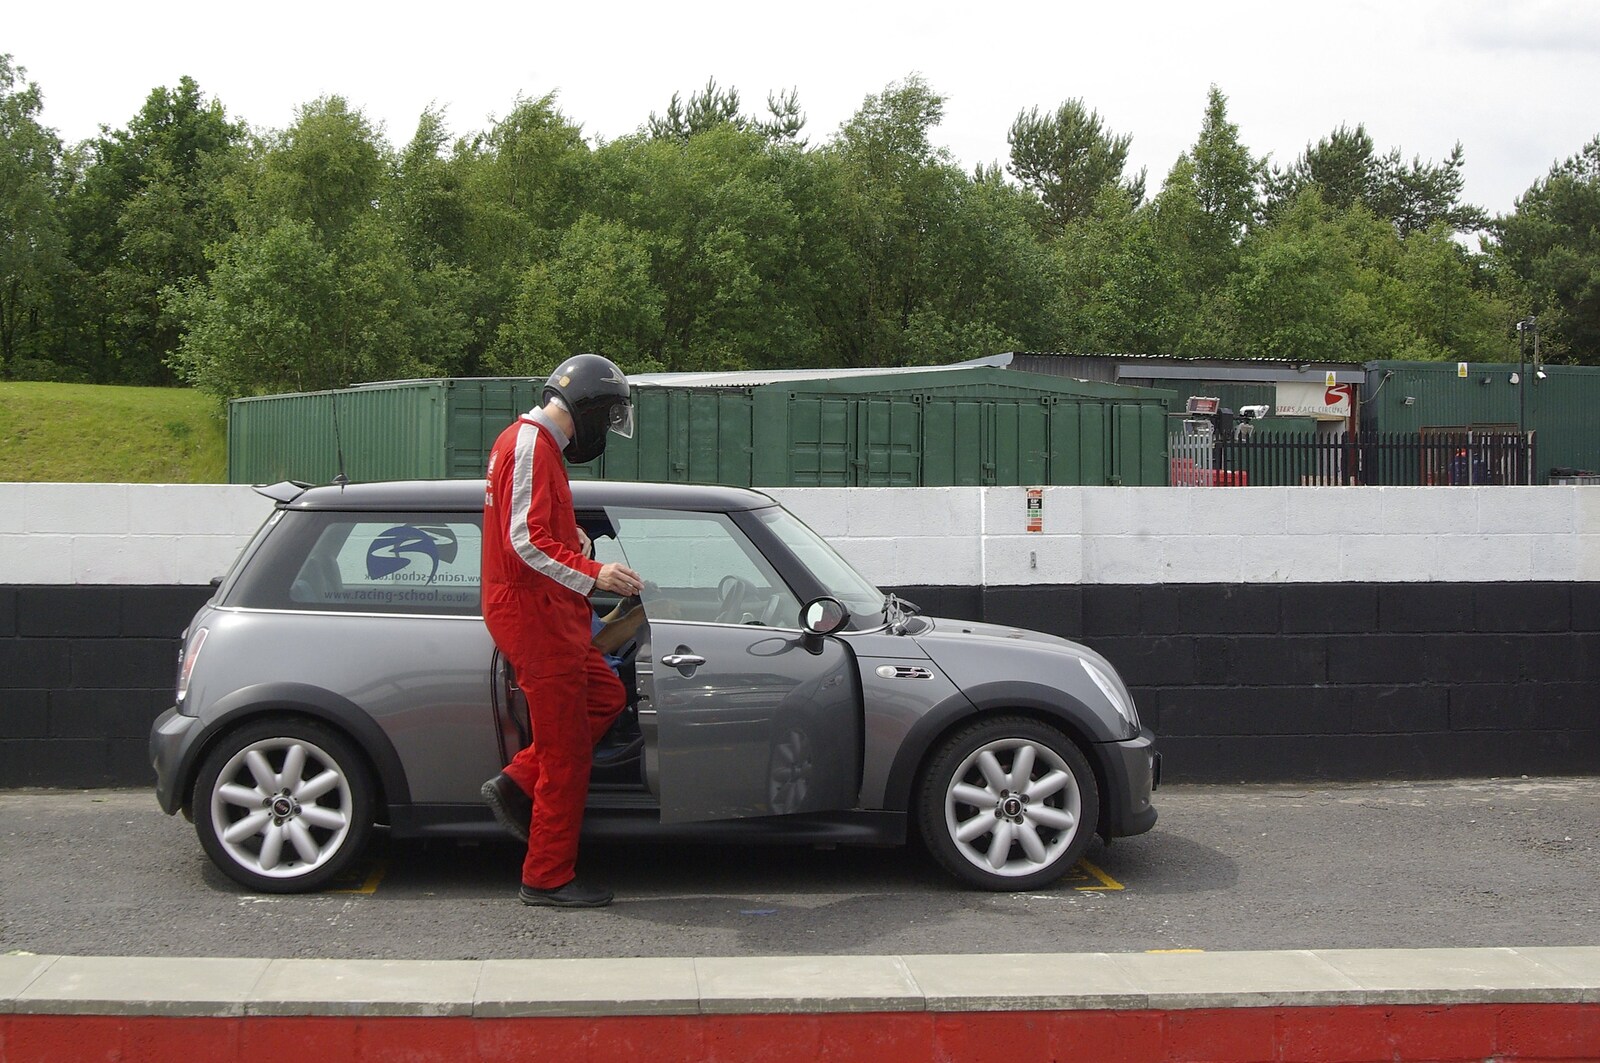 Driving a Racing Car, Three Sisters Racetrack, Wigan, Lancashire - 24th June 2008: Nosher gets in the Mini Cooper